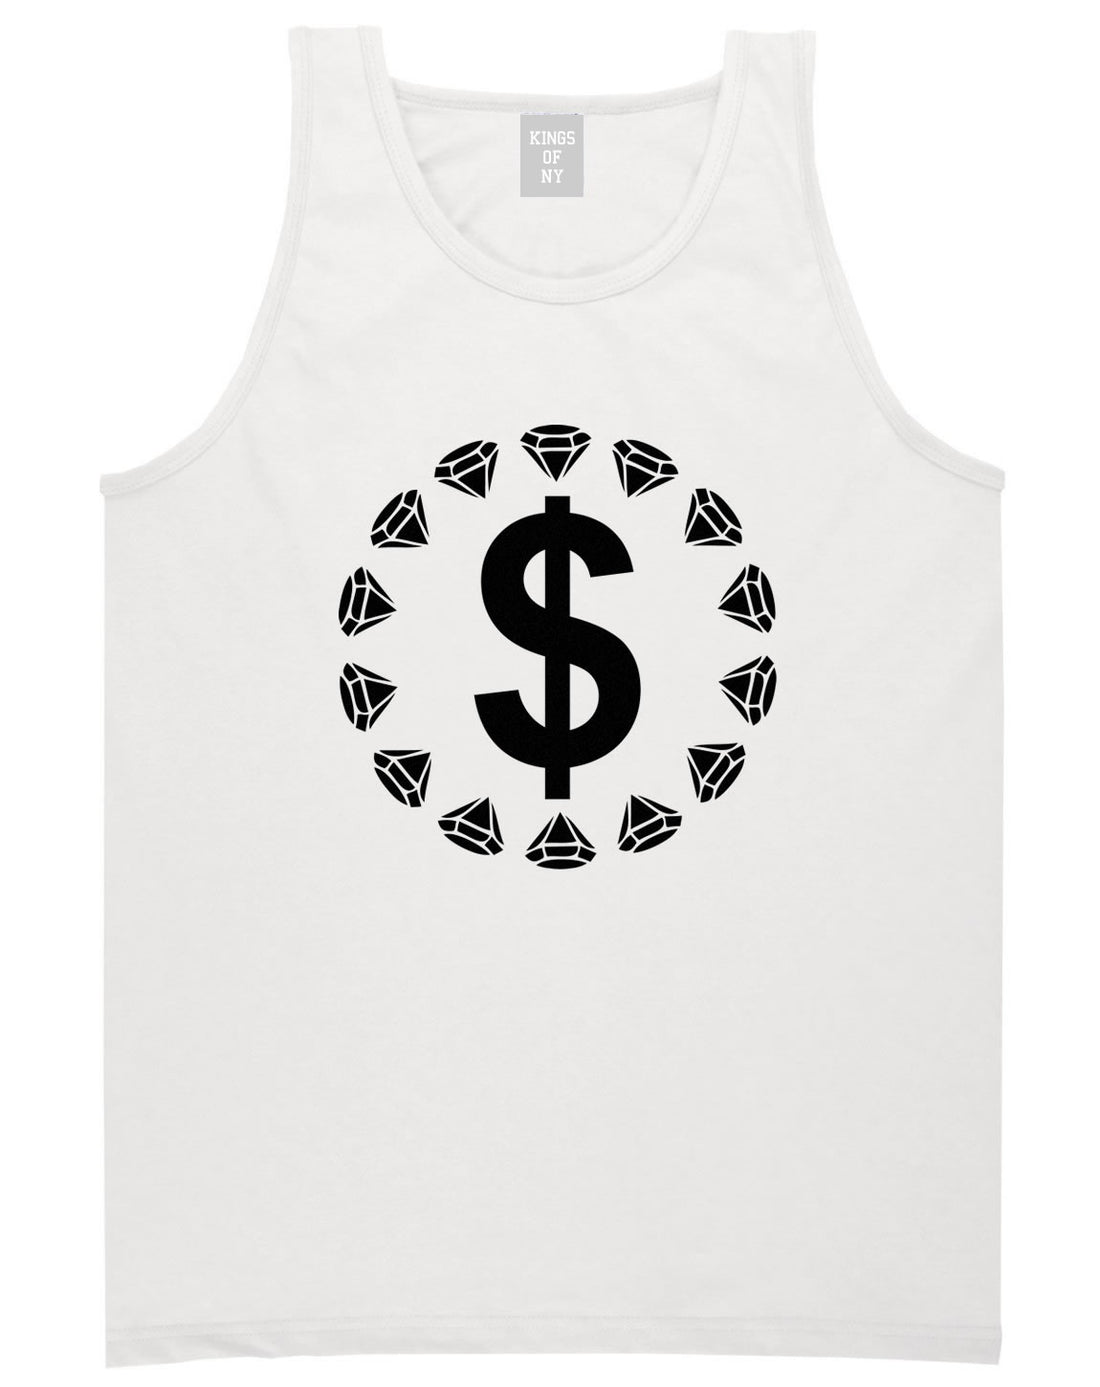 Diamonds Money Sign Logo Tank Top in White by Kings Of NY